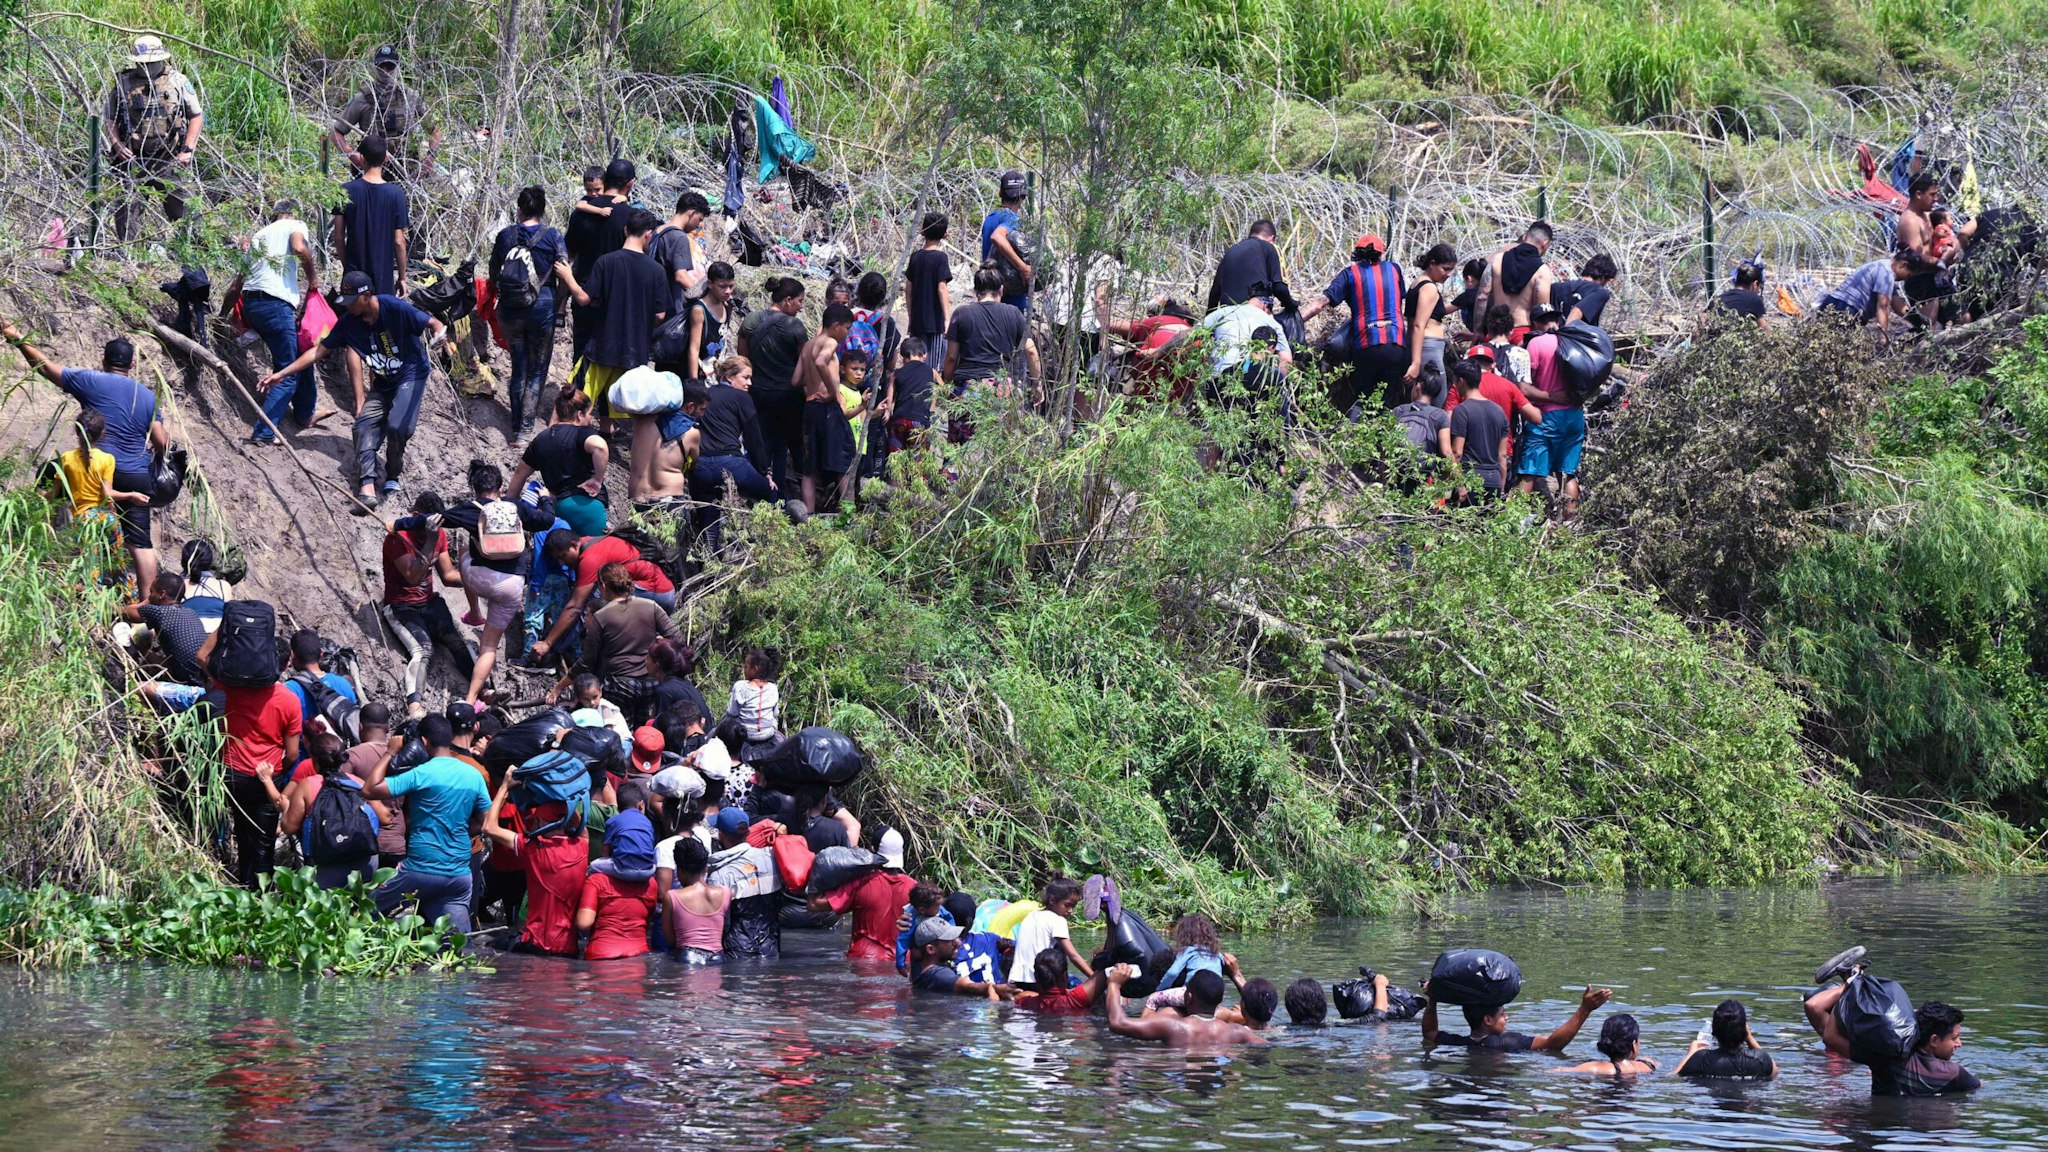 TOPSHOT - Migrants cross the Rio Grande River as they try to get to the US, as seen from Matamoros, state of Tamaulipas, Mexico, on May 11, 2023. Pandemic-era controls barring migrants from claiming US asylum expire Thursday night amid fears of chaos at the Mexican border, with a tough new policy spelling uncertainty for thousands seeking refuge in America. The White House warned that beginning Friday, anyone entering the United States illicitly will face a lengthy ban and possible criminal charges.